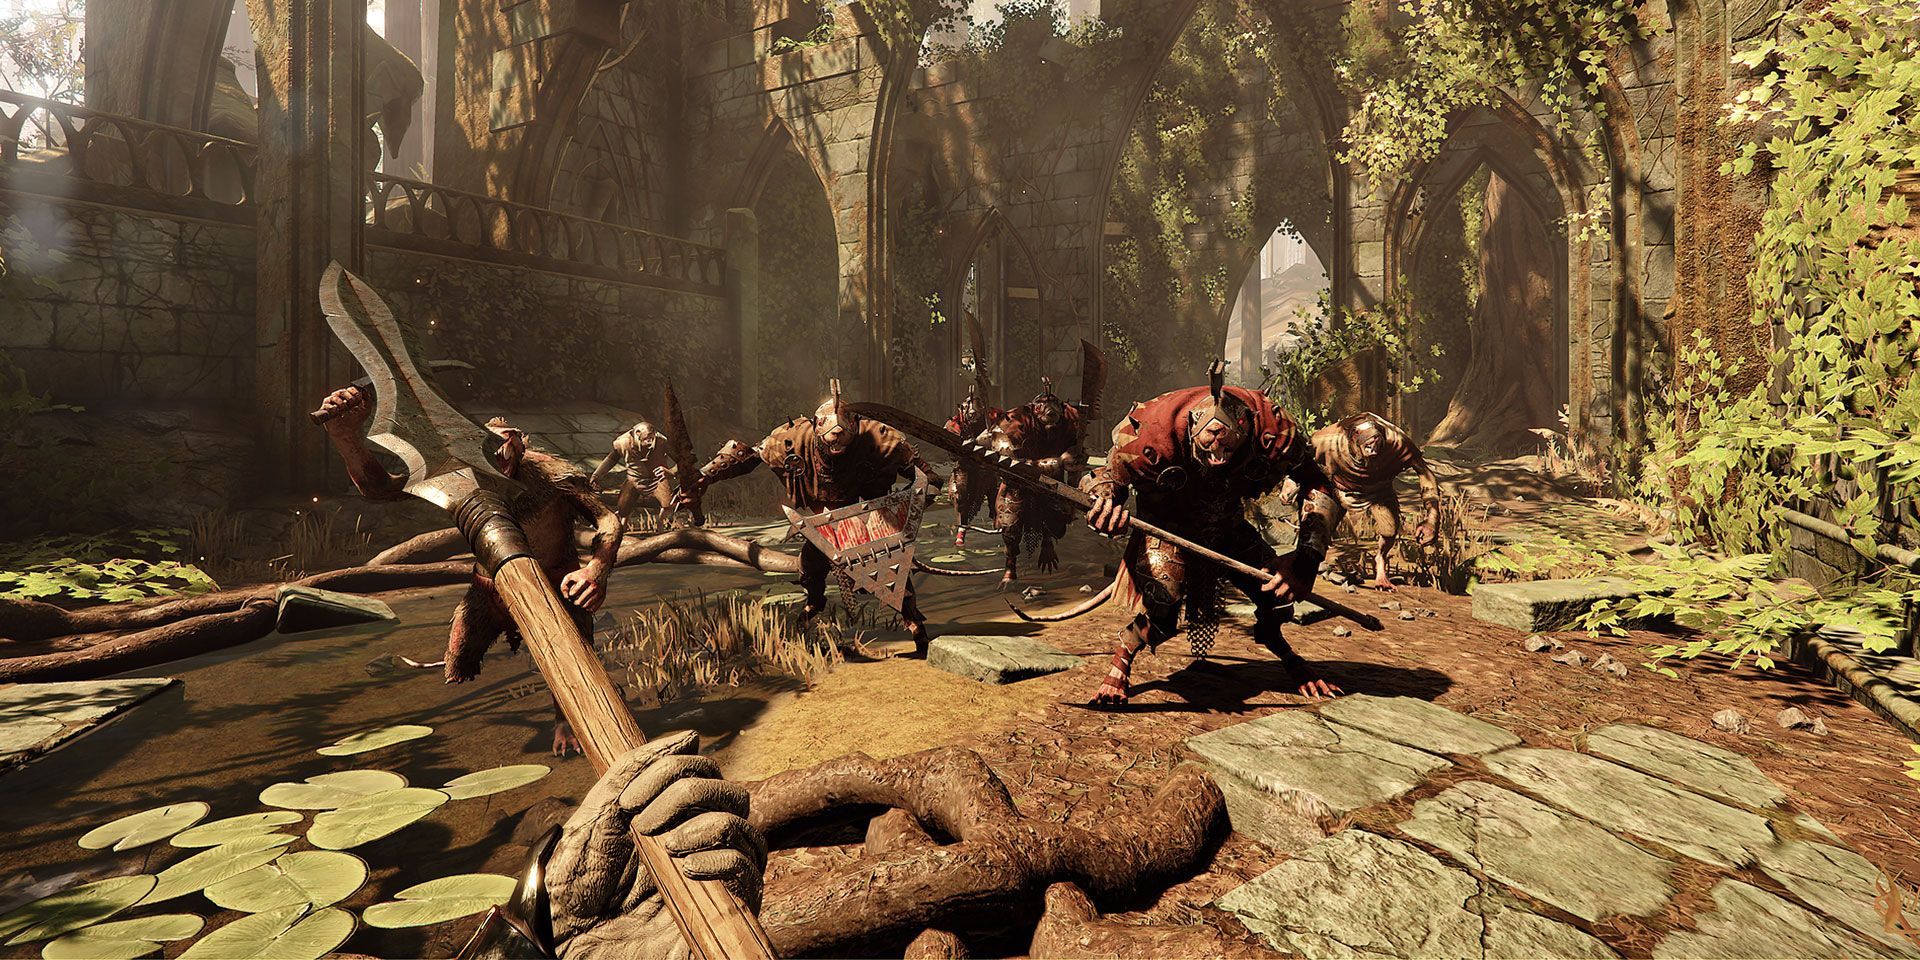 The player character faces multiple Skaven with a spear